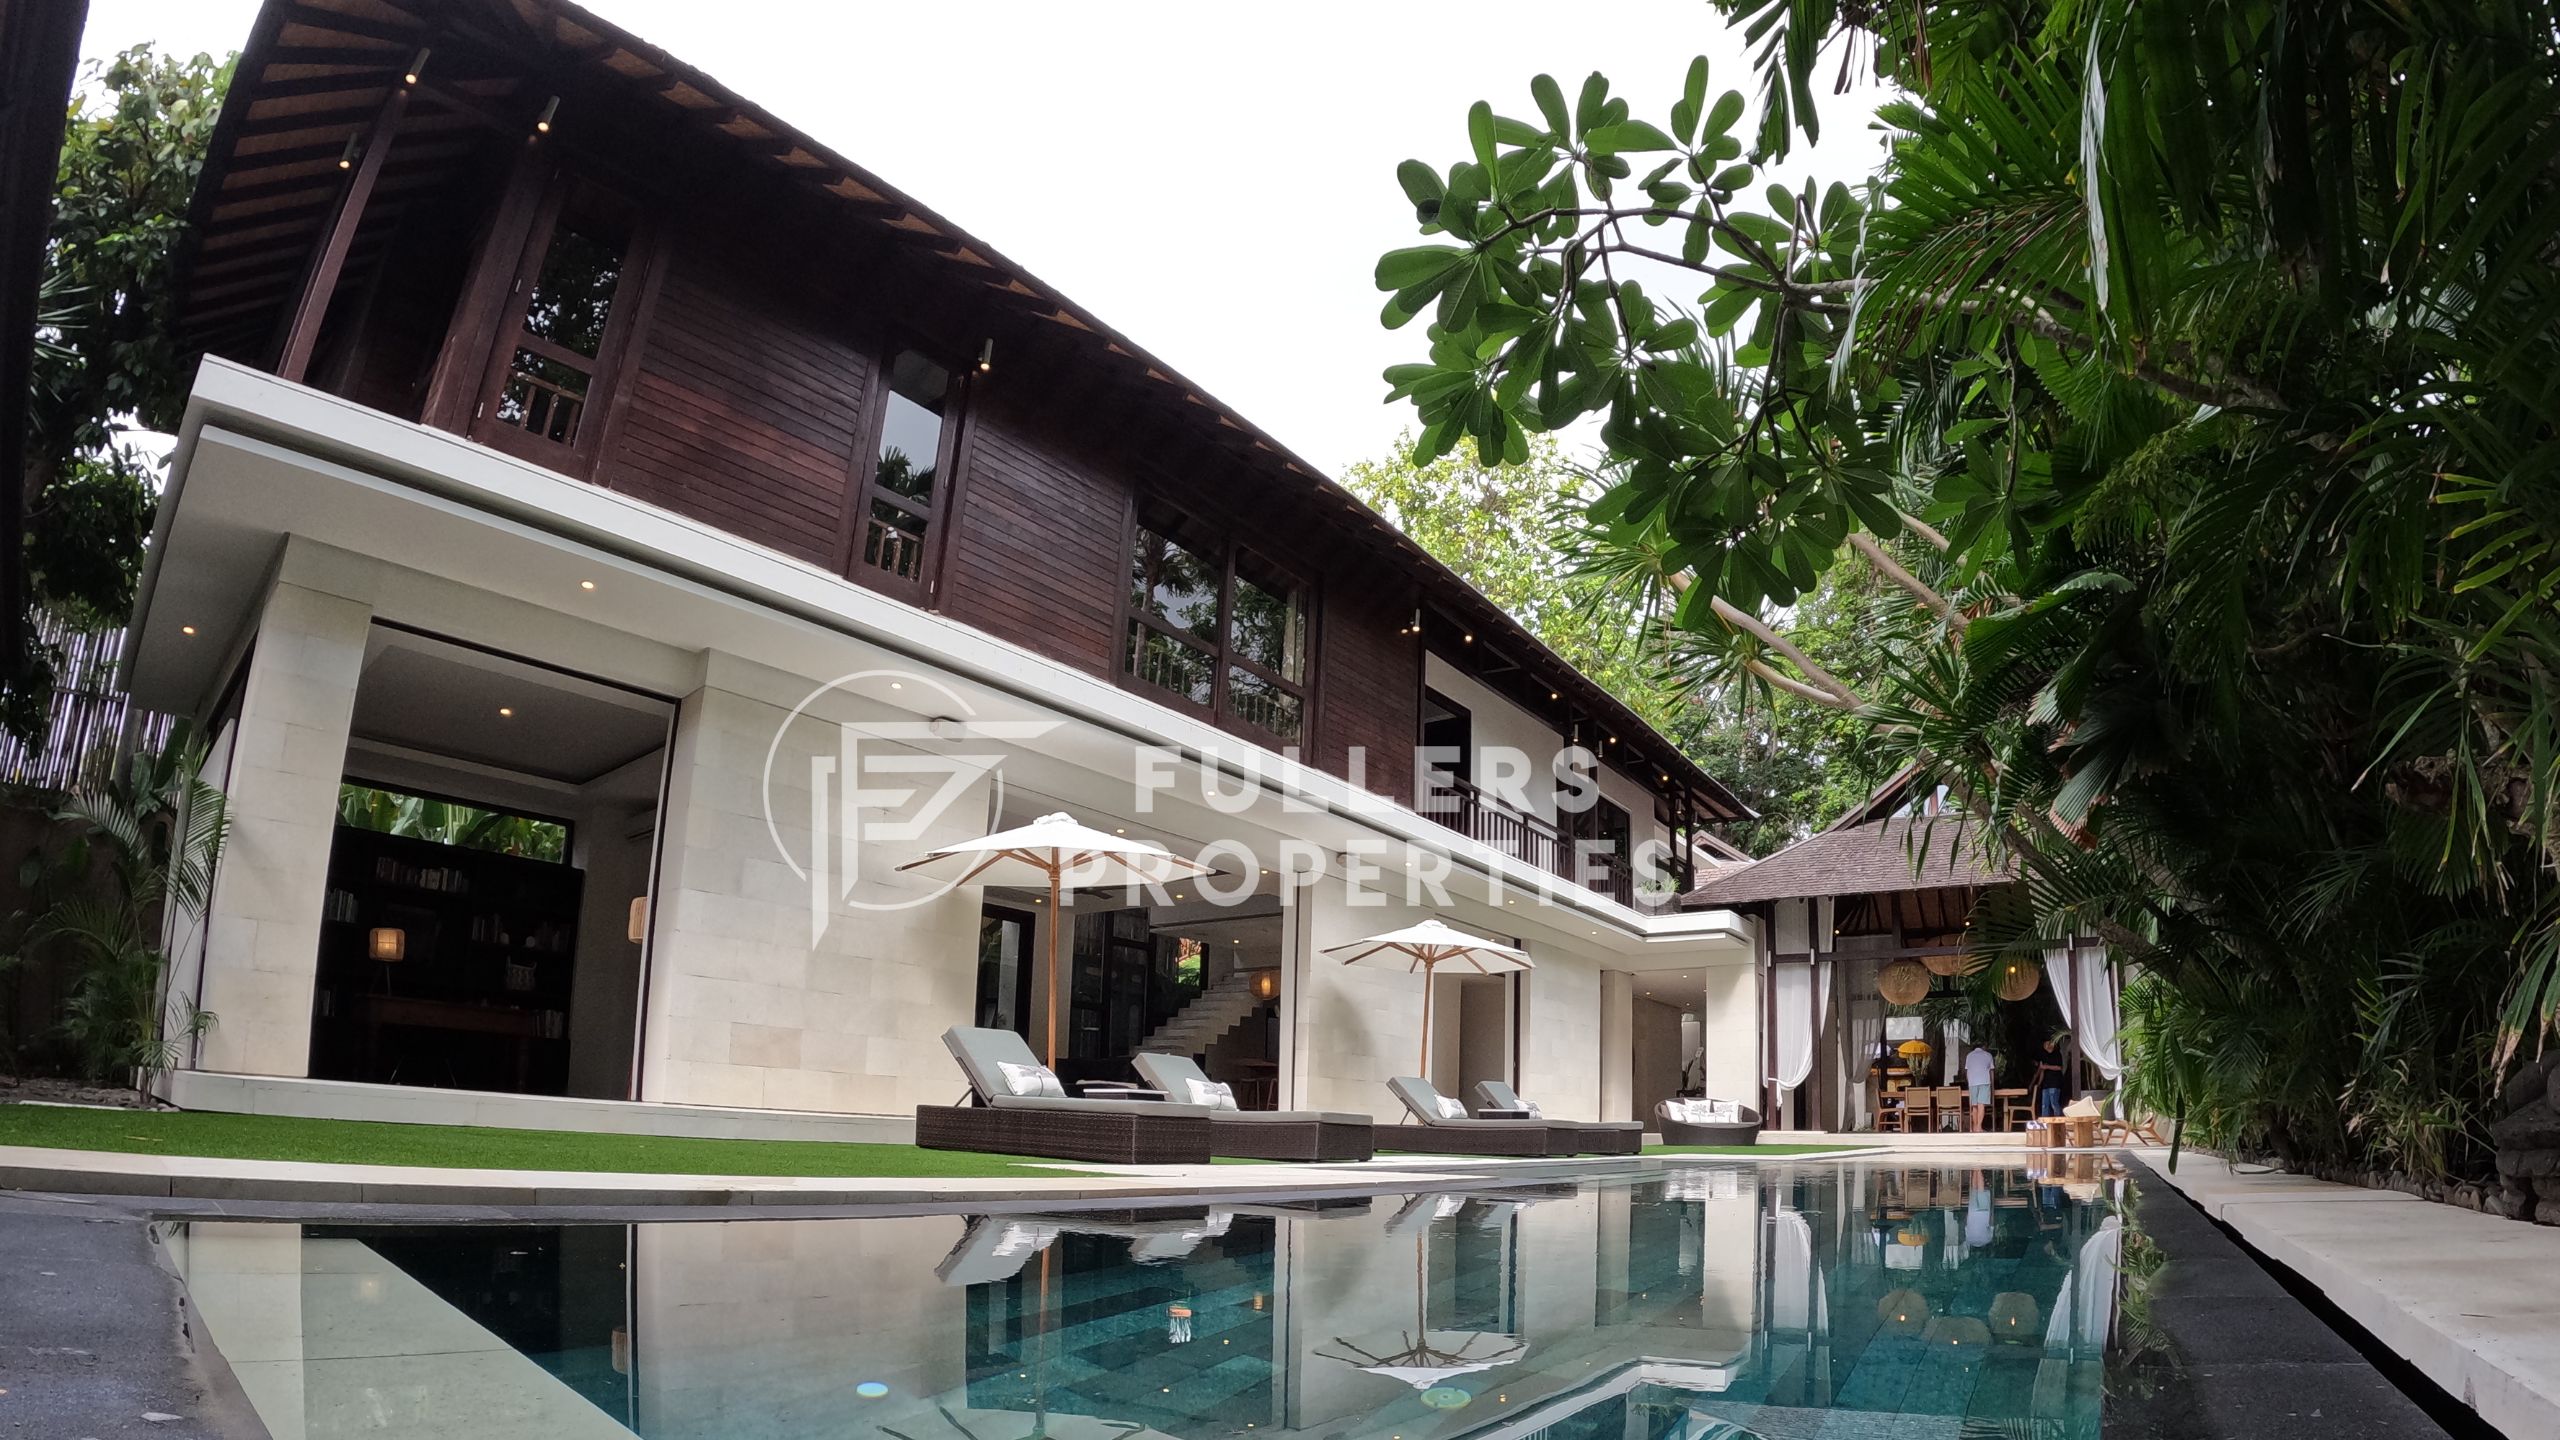 Fullers Properties: The Best Real Estate Agent in Bali